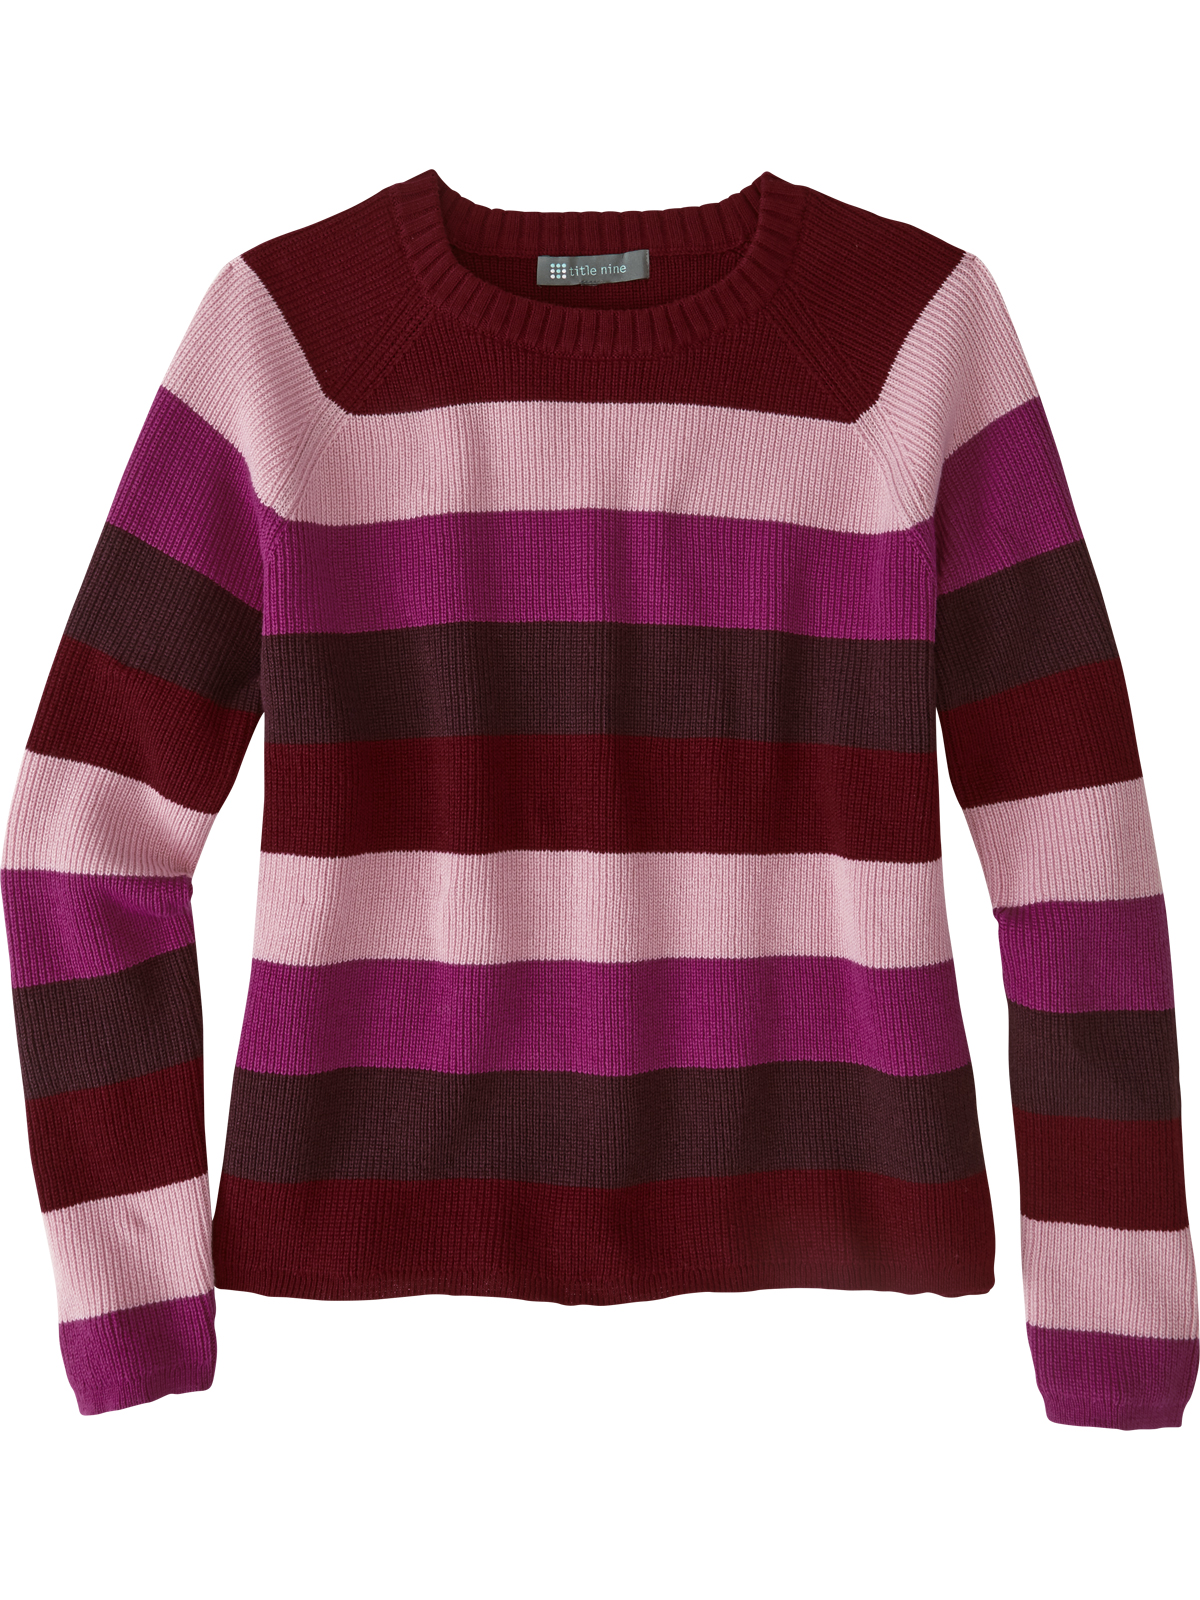 | Title Striped Nine Offsite Crew Neck Sweater Women: for